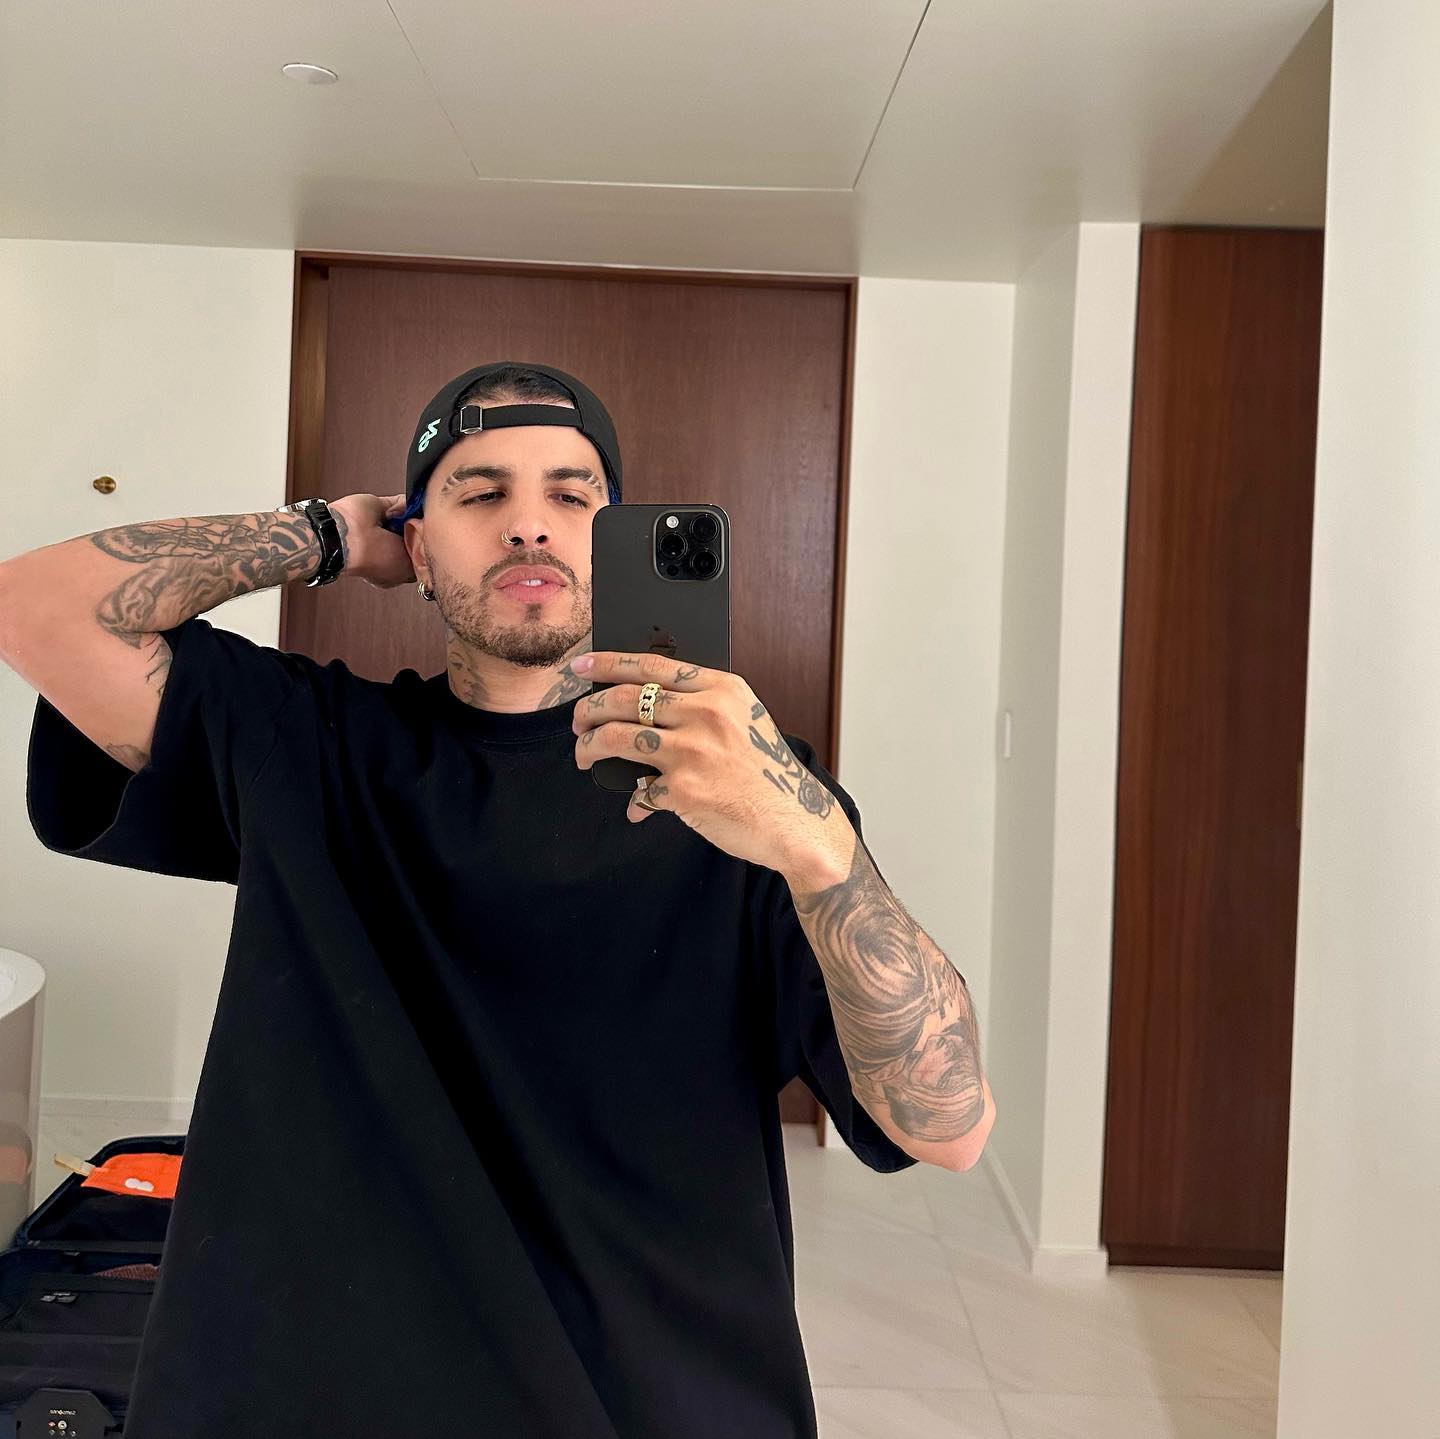 Rauw Alejandro Biography: Height, Age, Wife, Net Worth, Songs, Tours, Instagram, Wiki, Tickets